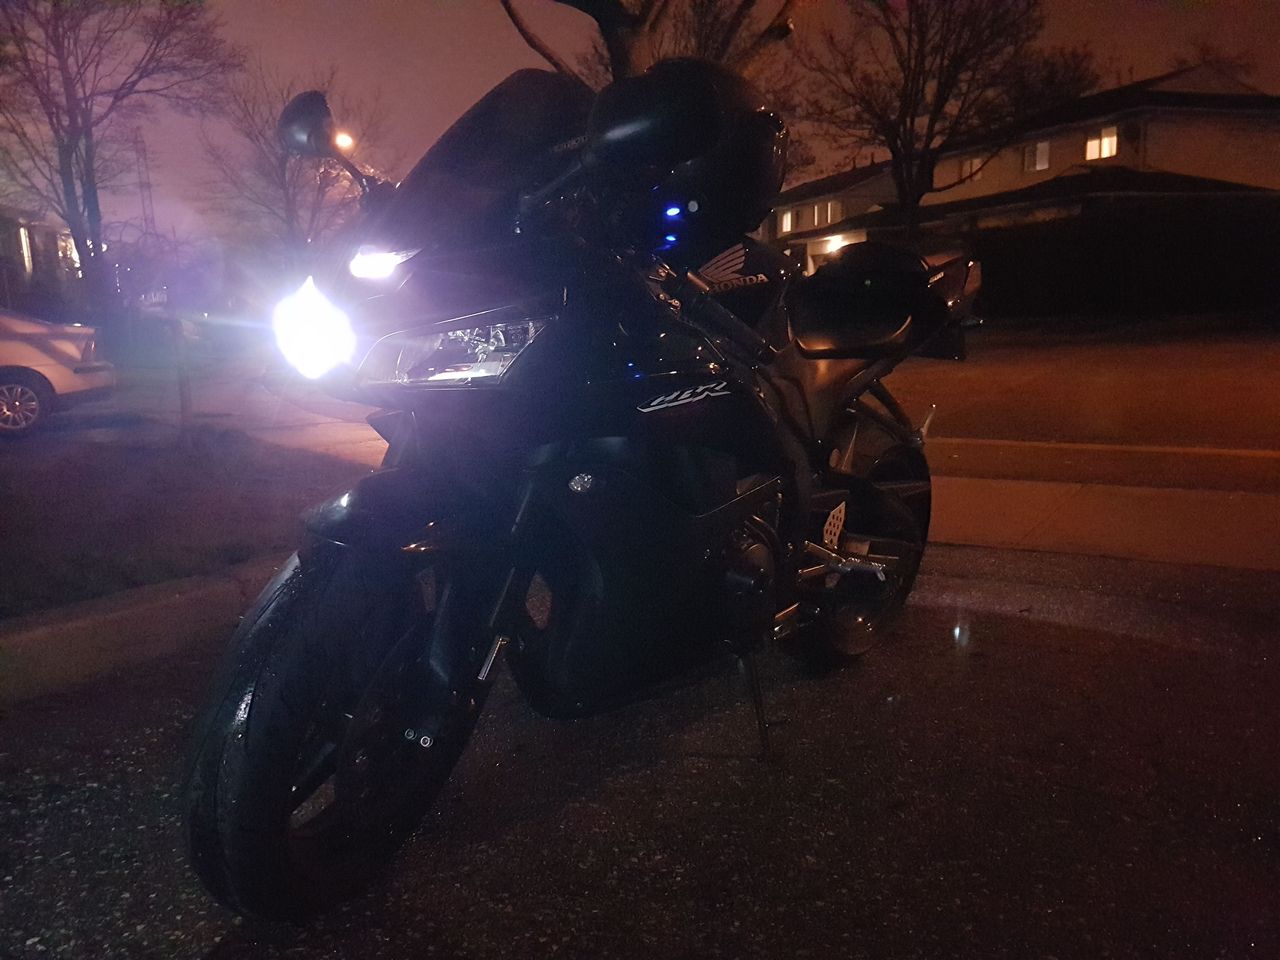 First ride of the season